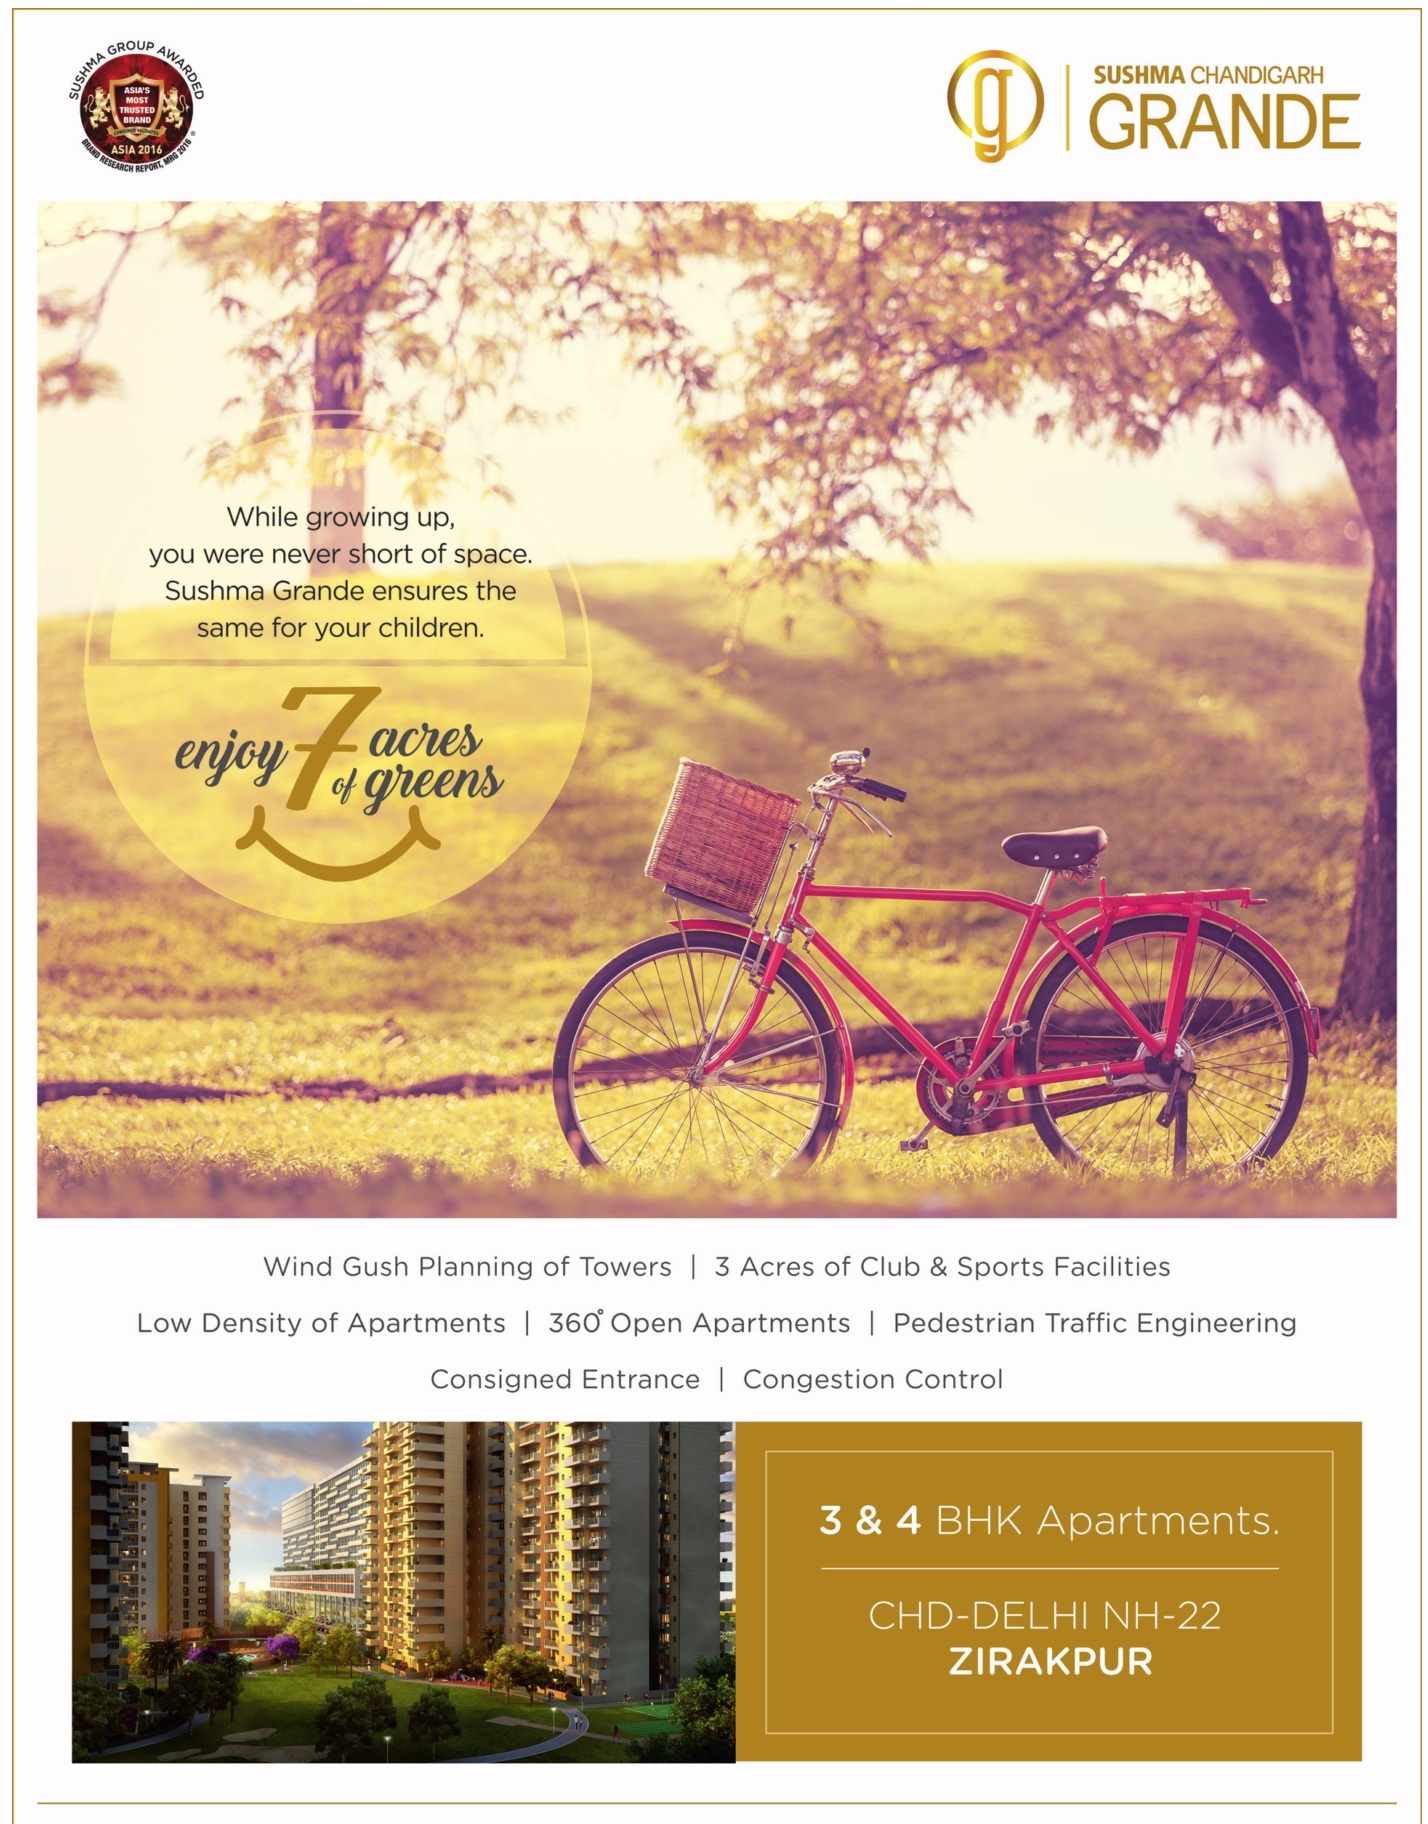 Enjoy healthy living with 7 acres of greens at Sushma Chandigarh Grande in Chandigarh Update